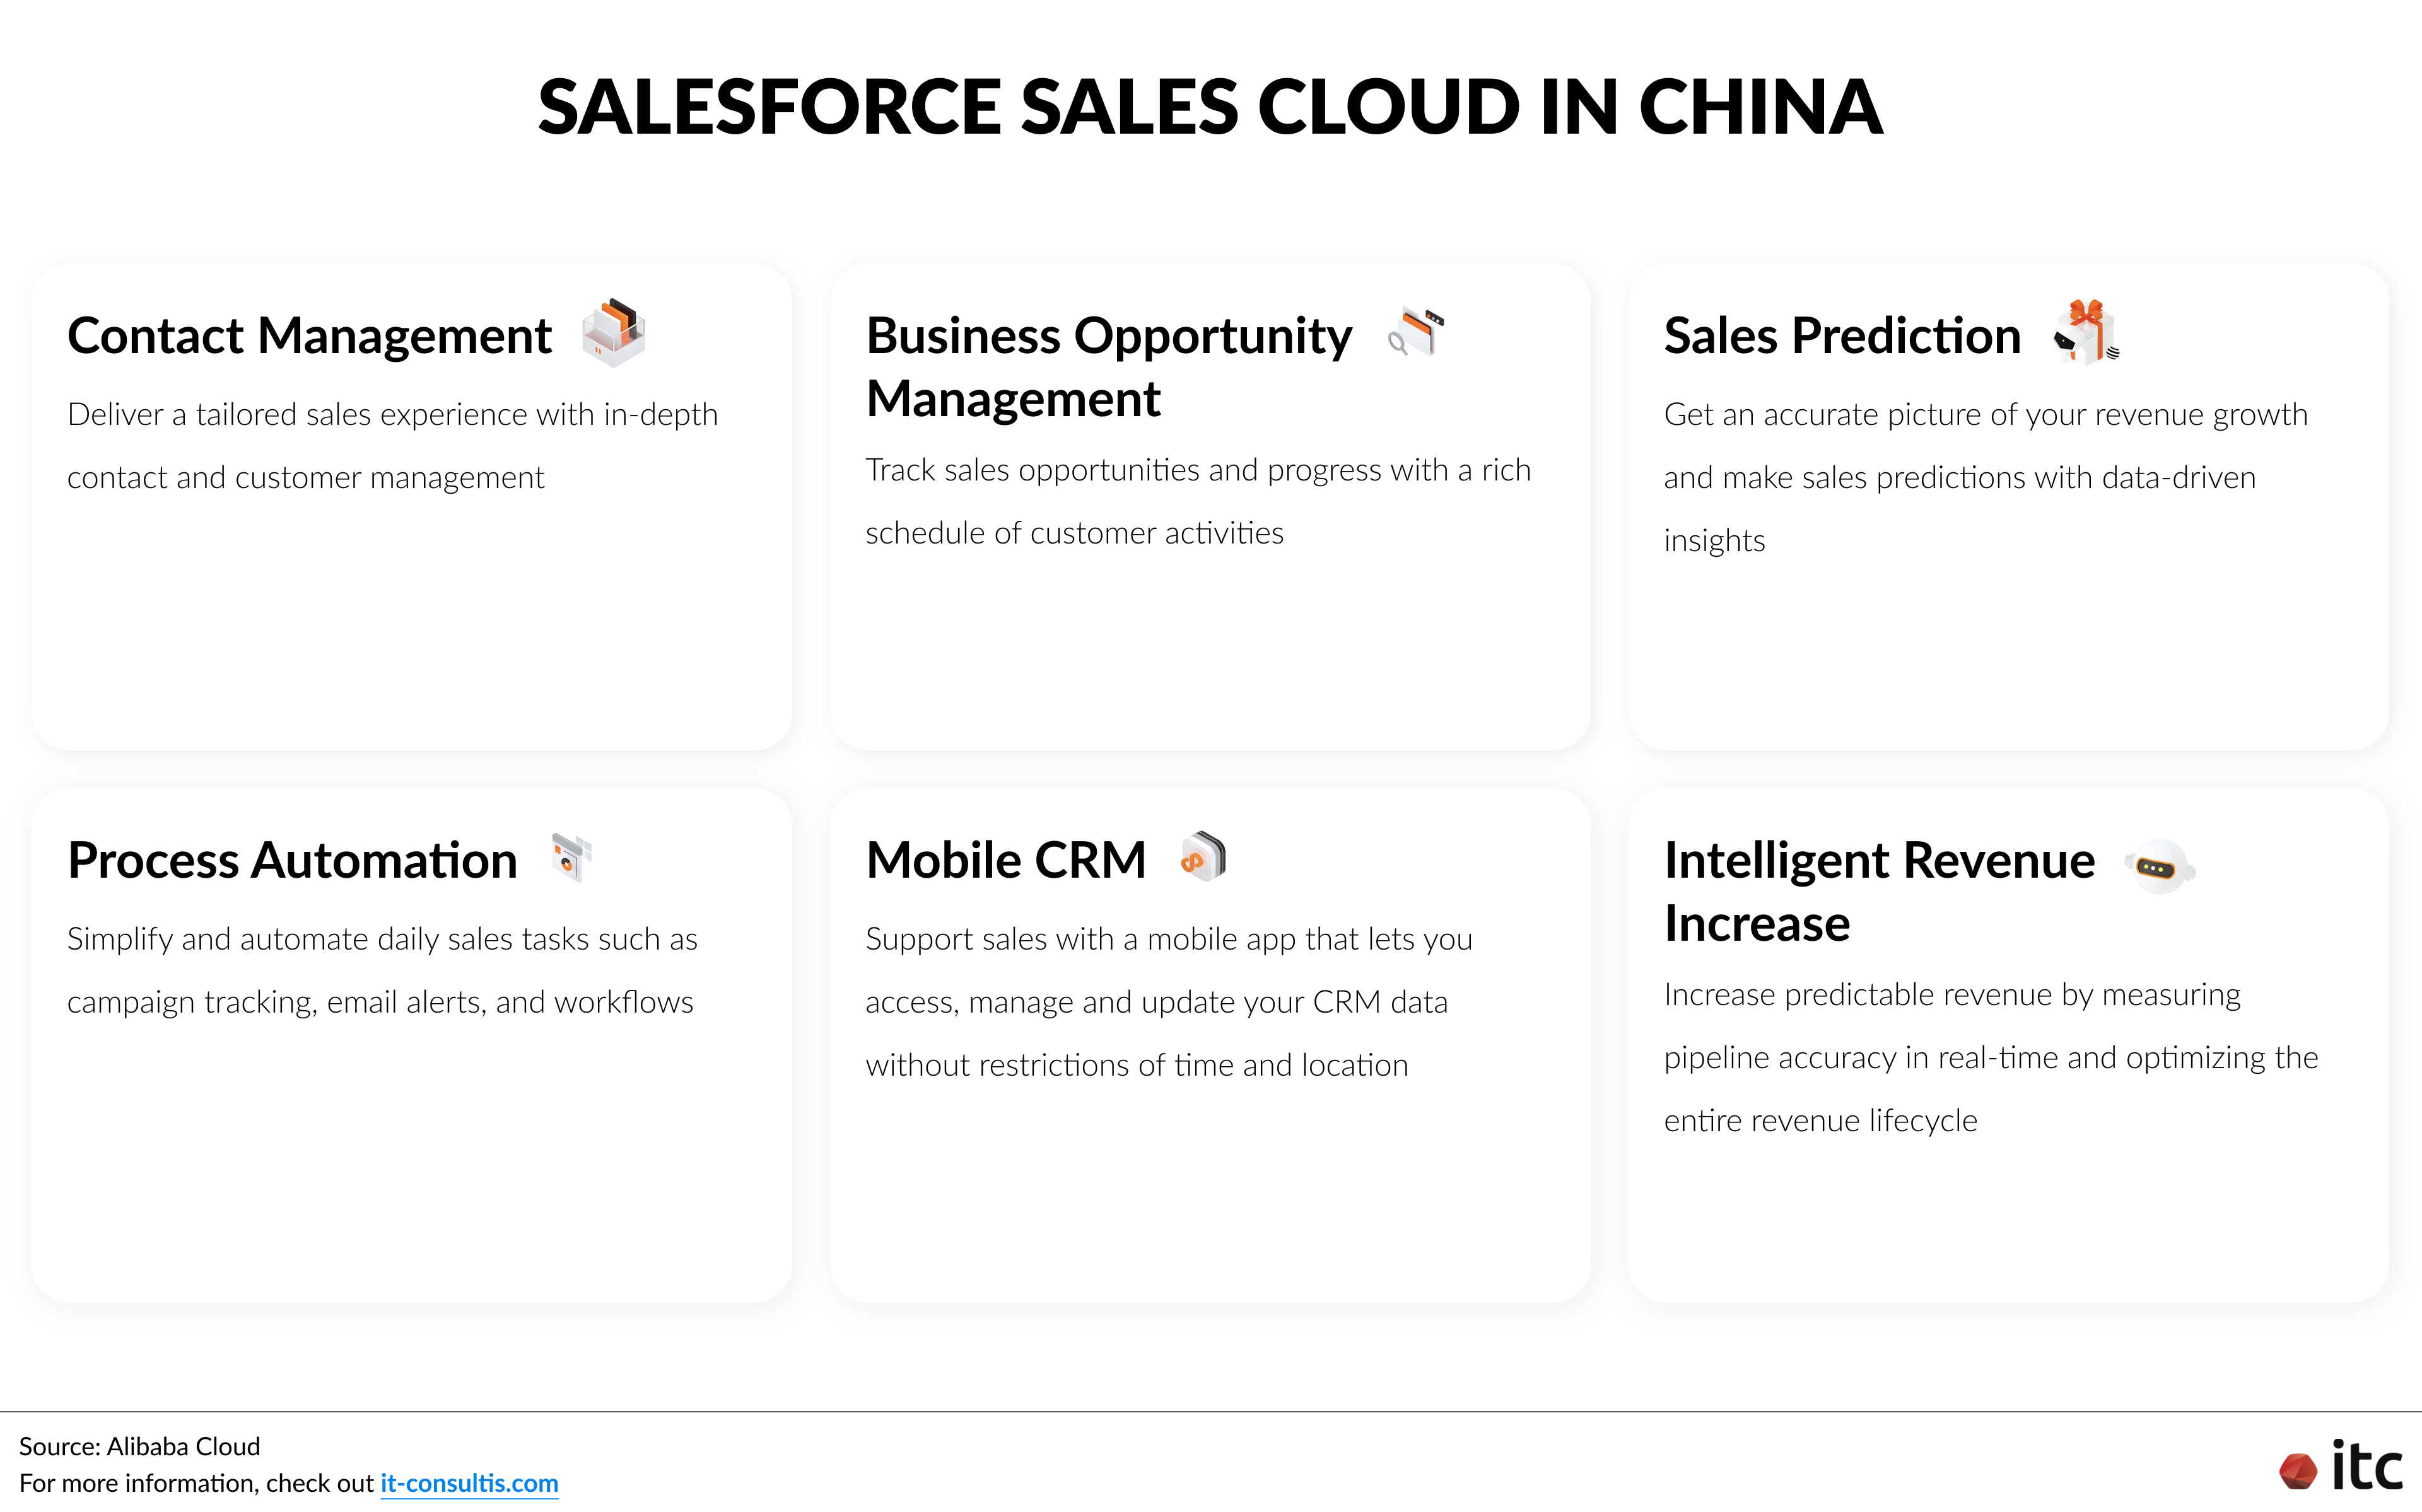 Features of Salesforce Sales Cloud on Alibaba Cloud in China